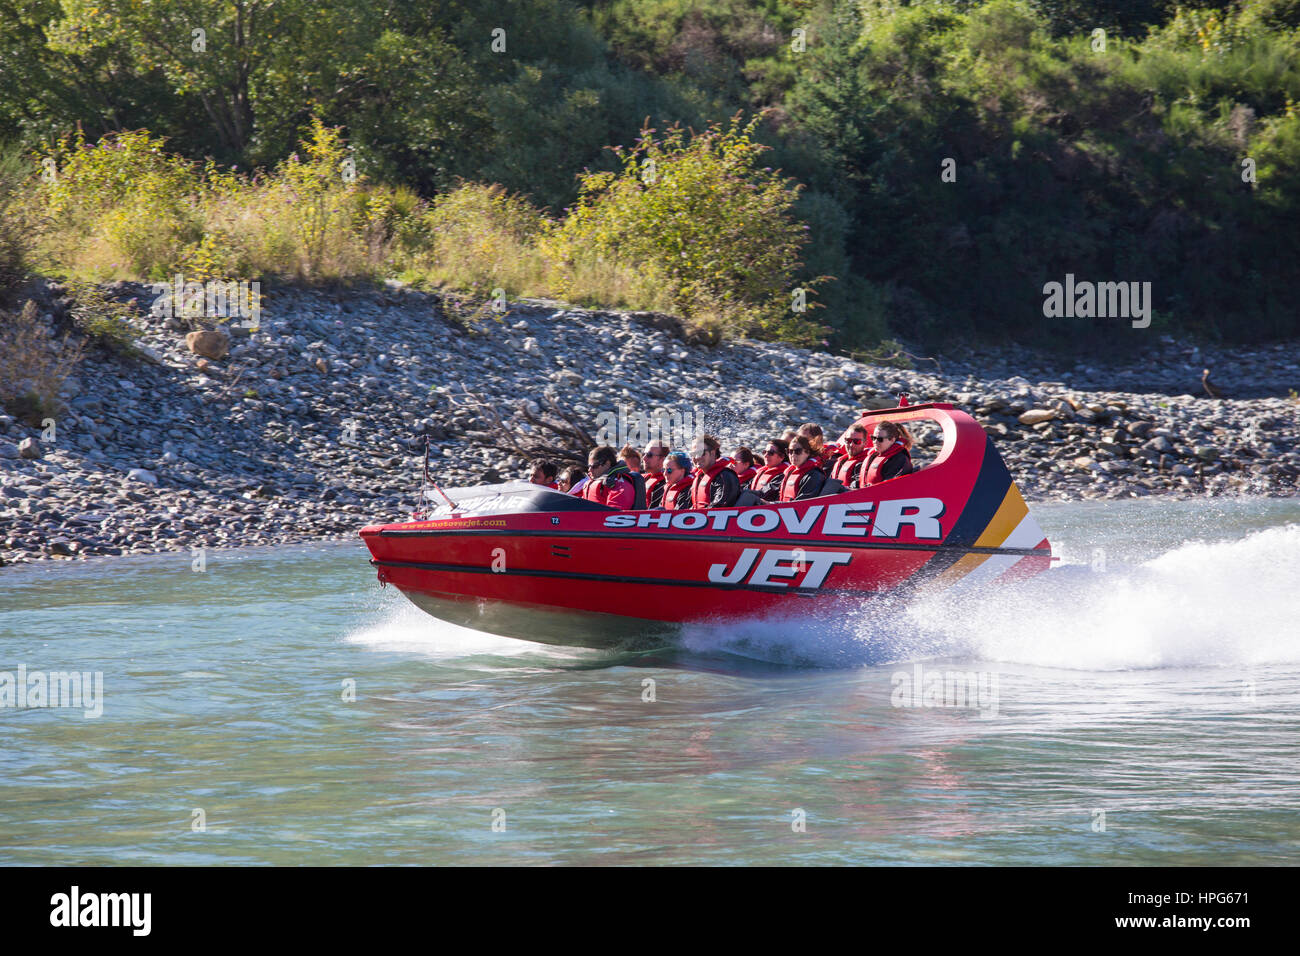 Queenstown, Otago, New Zealand. Shotover Jet boat speeding across the turquoise waters of the Shotover River. Stock Photo